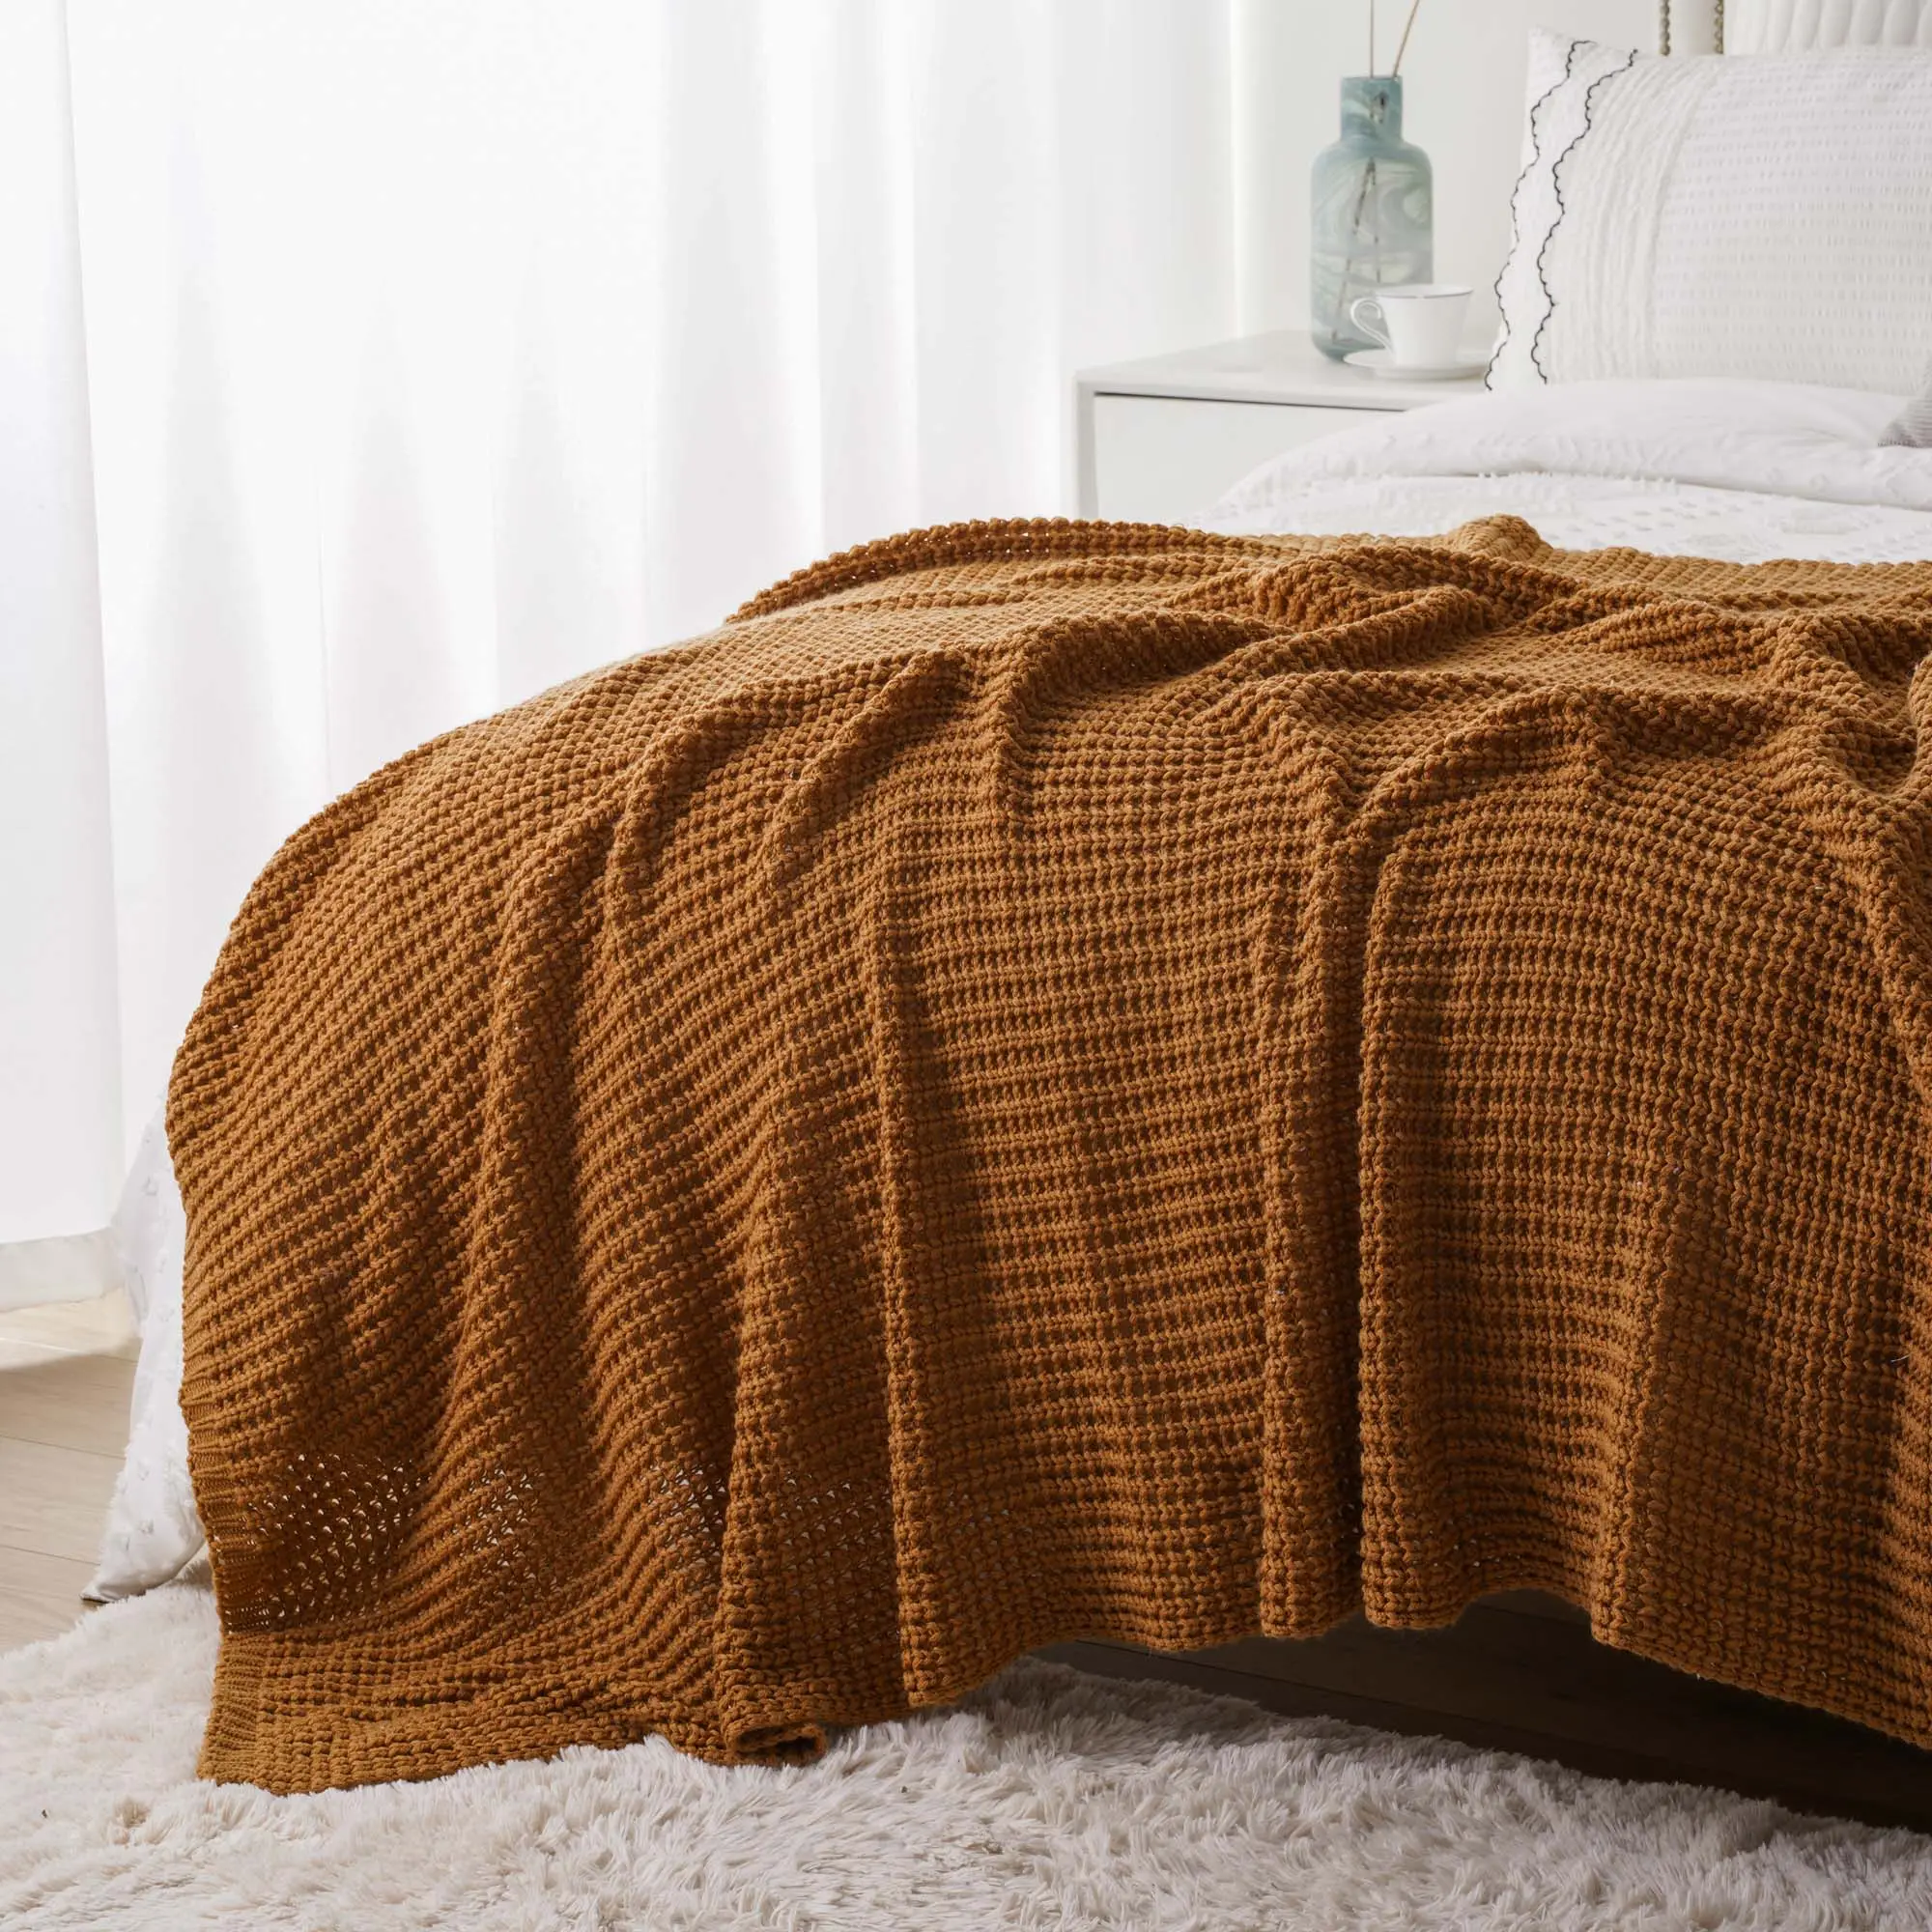 Orange Cable Knit Throw Blanket for Couch Sofa Chair Bed Home Decorative 50 x 60 Inch Throw Blankets